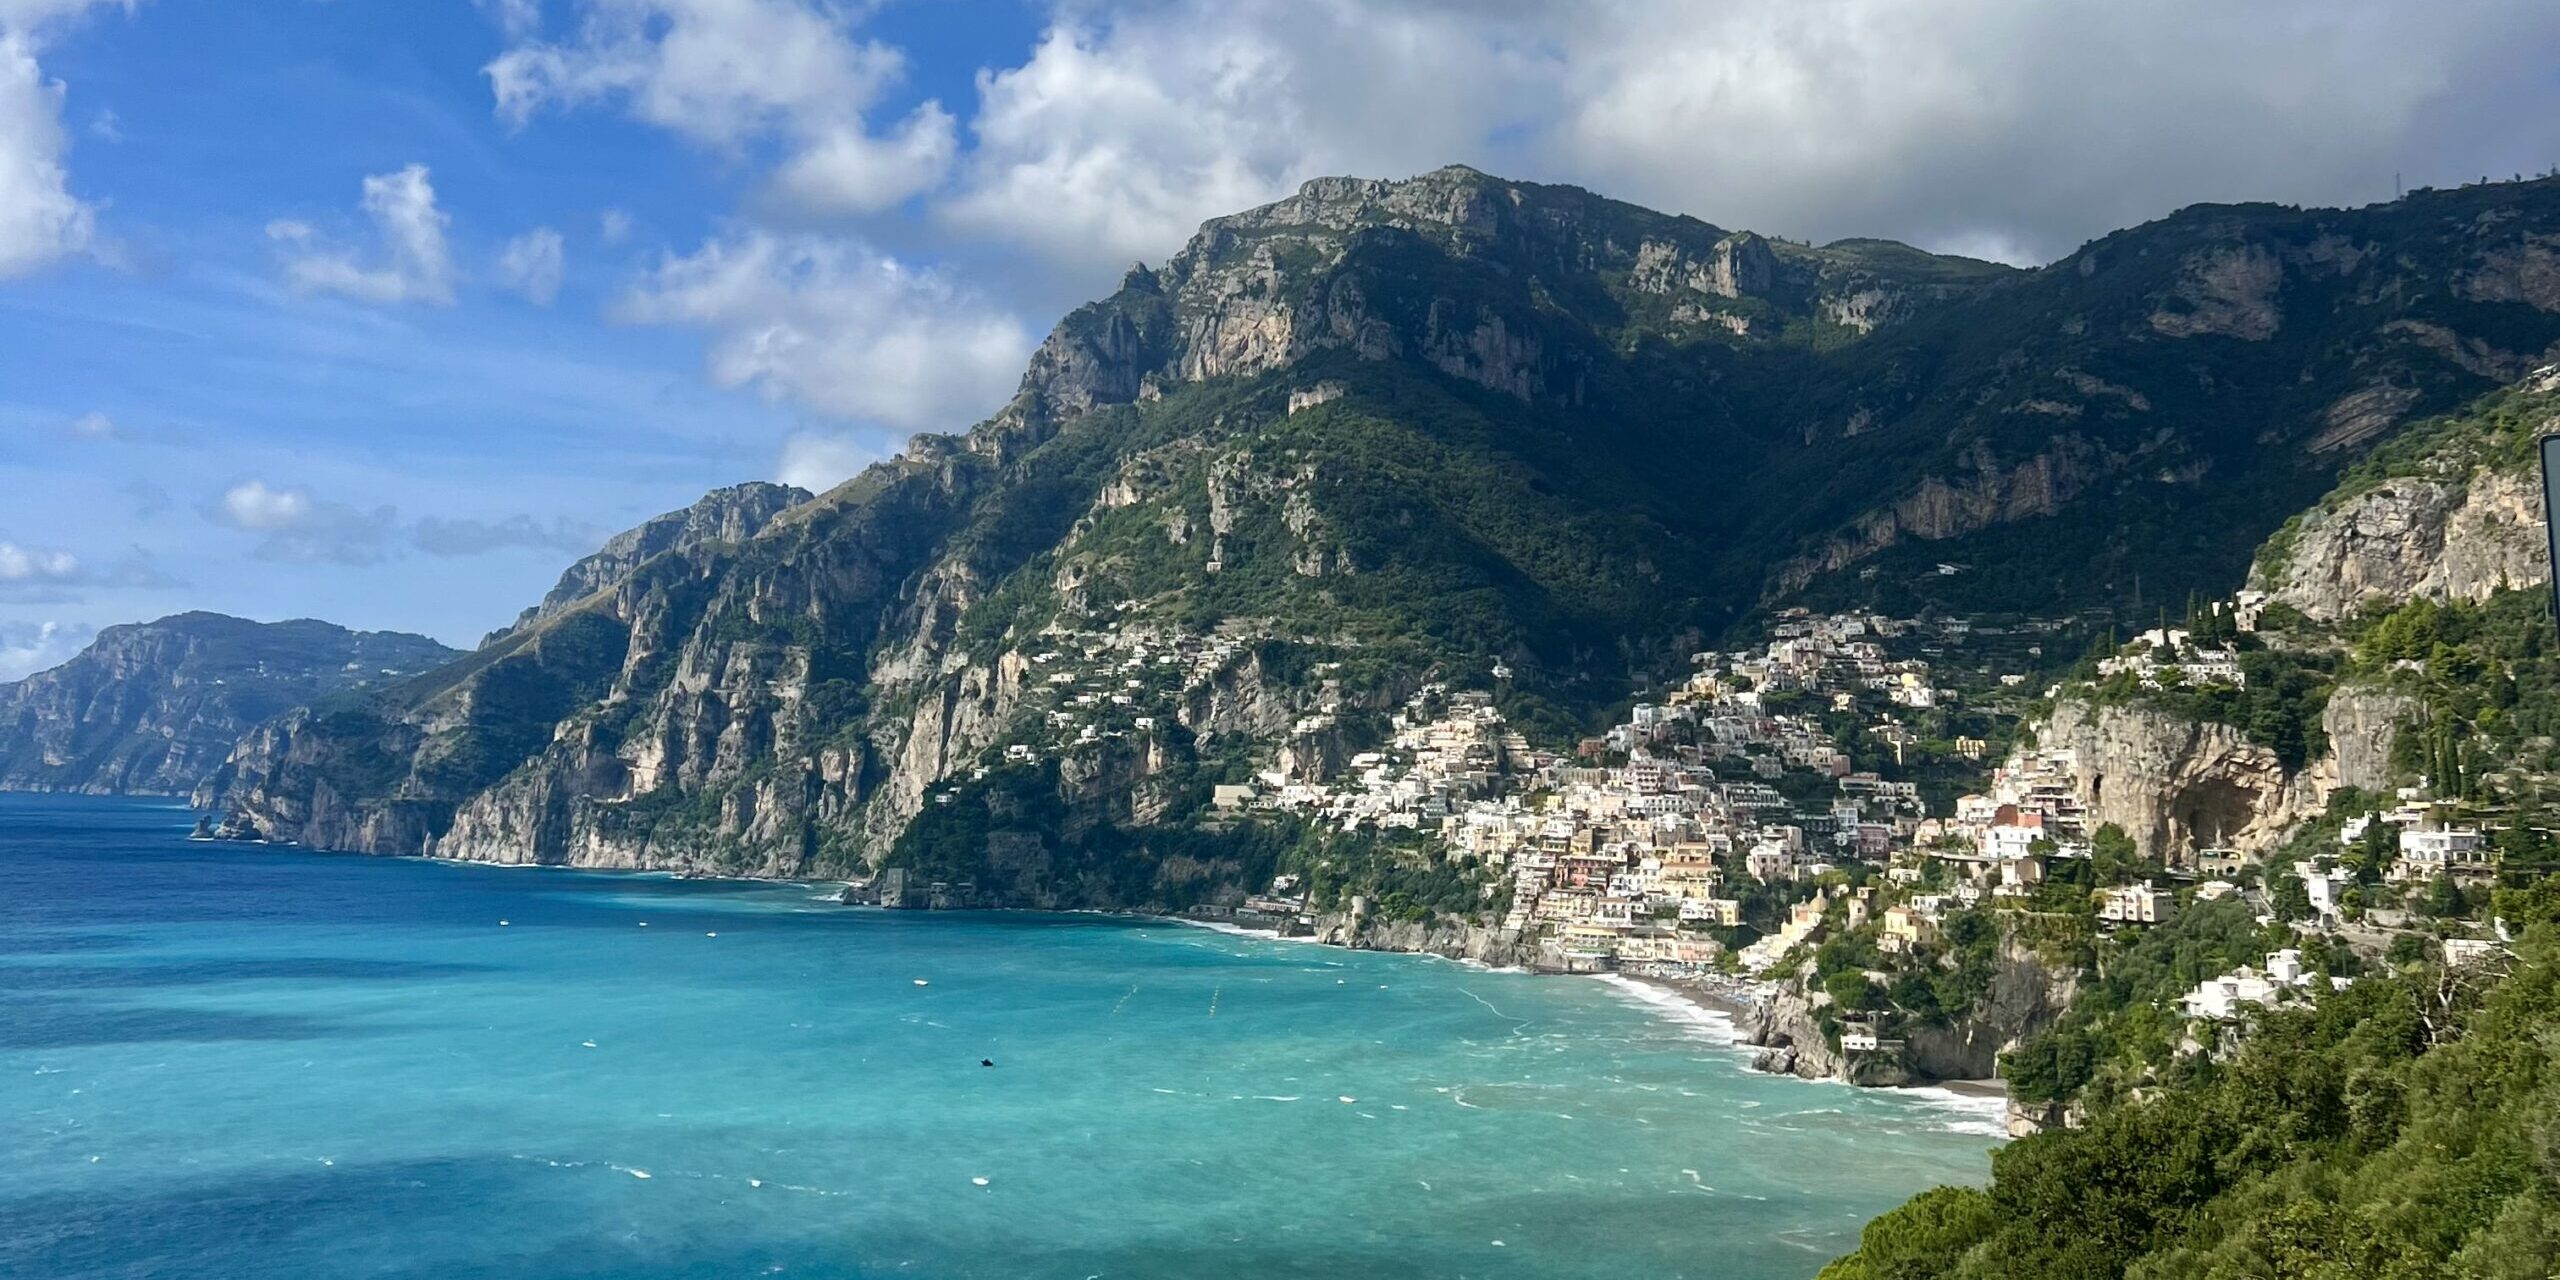 The view of Positano from afar with turquoise blue waters